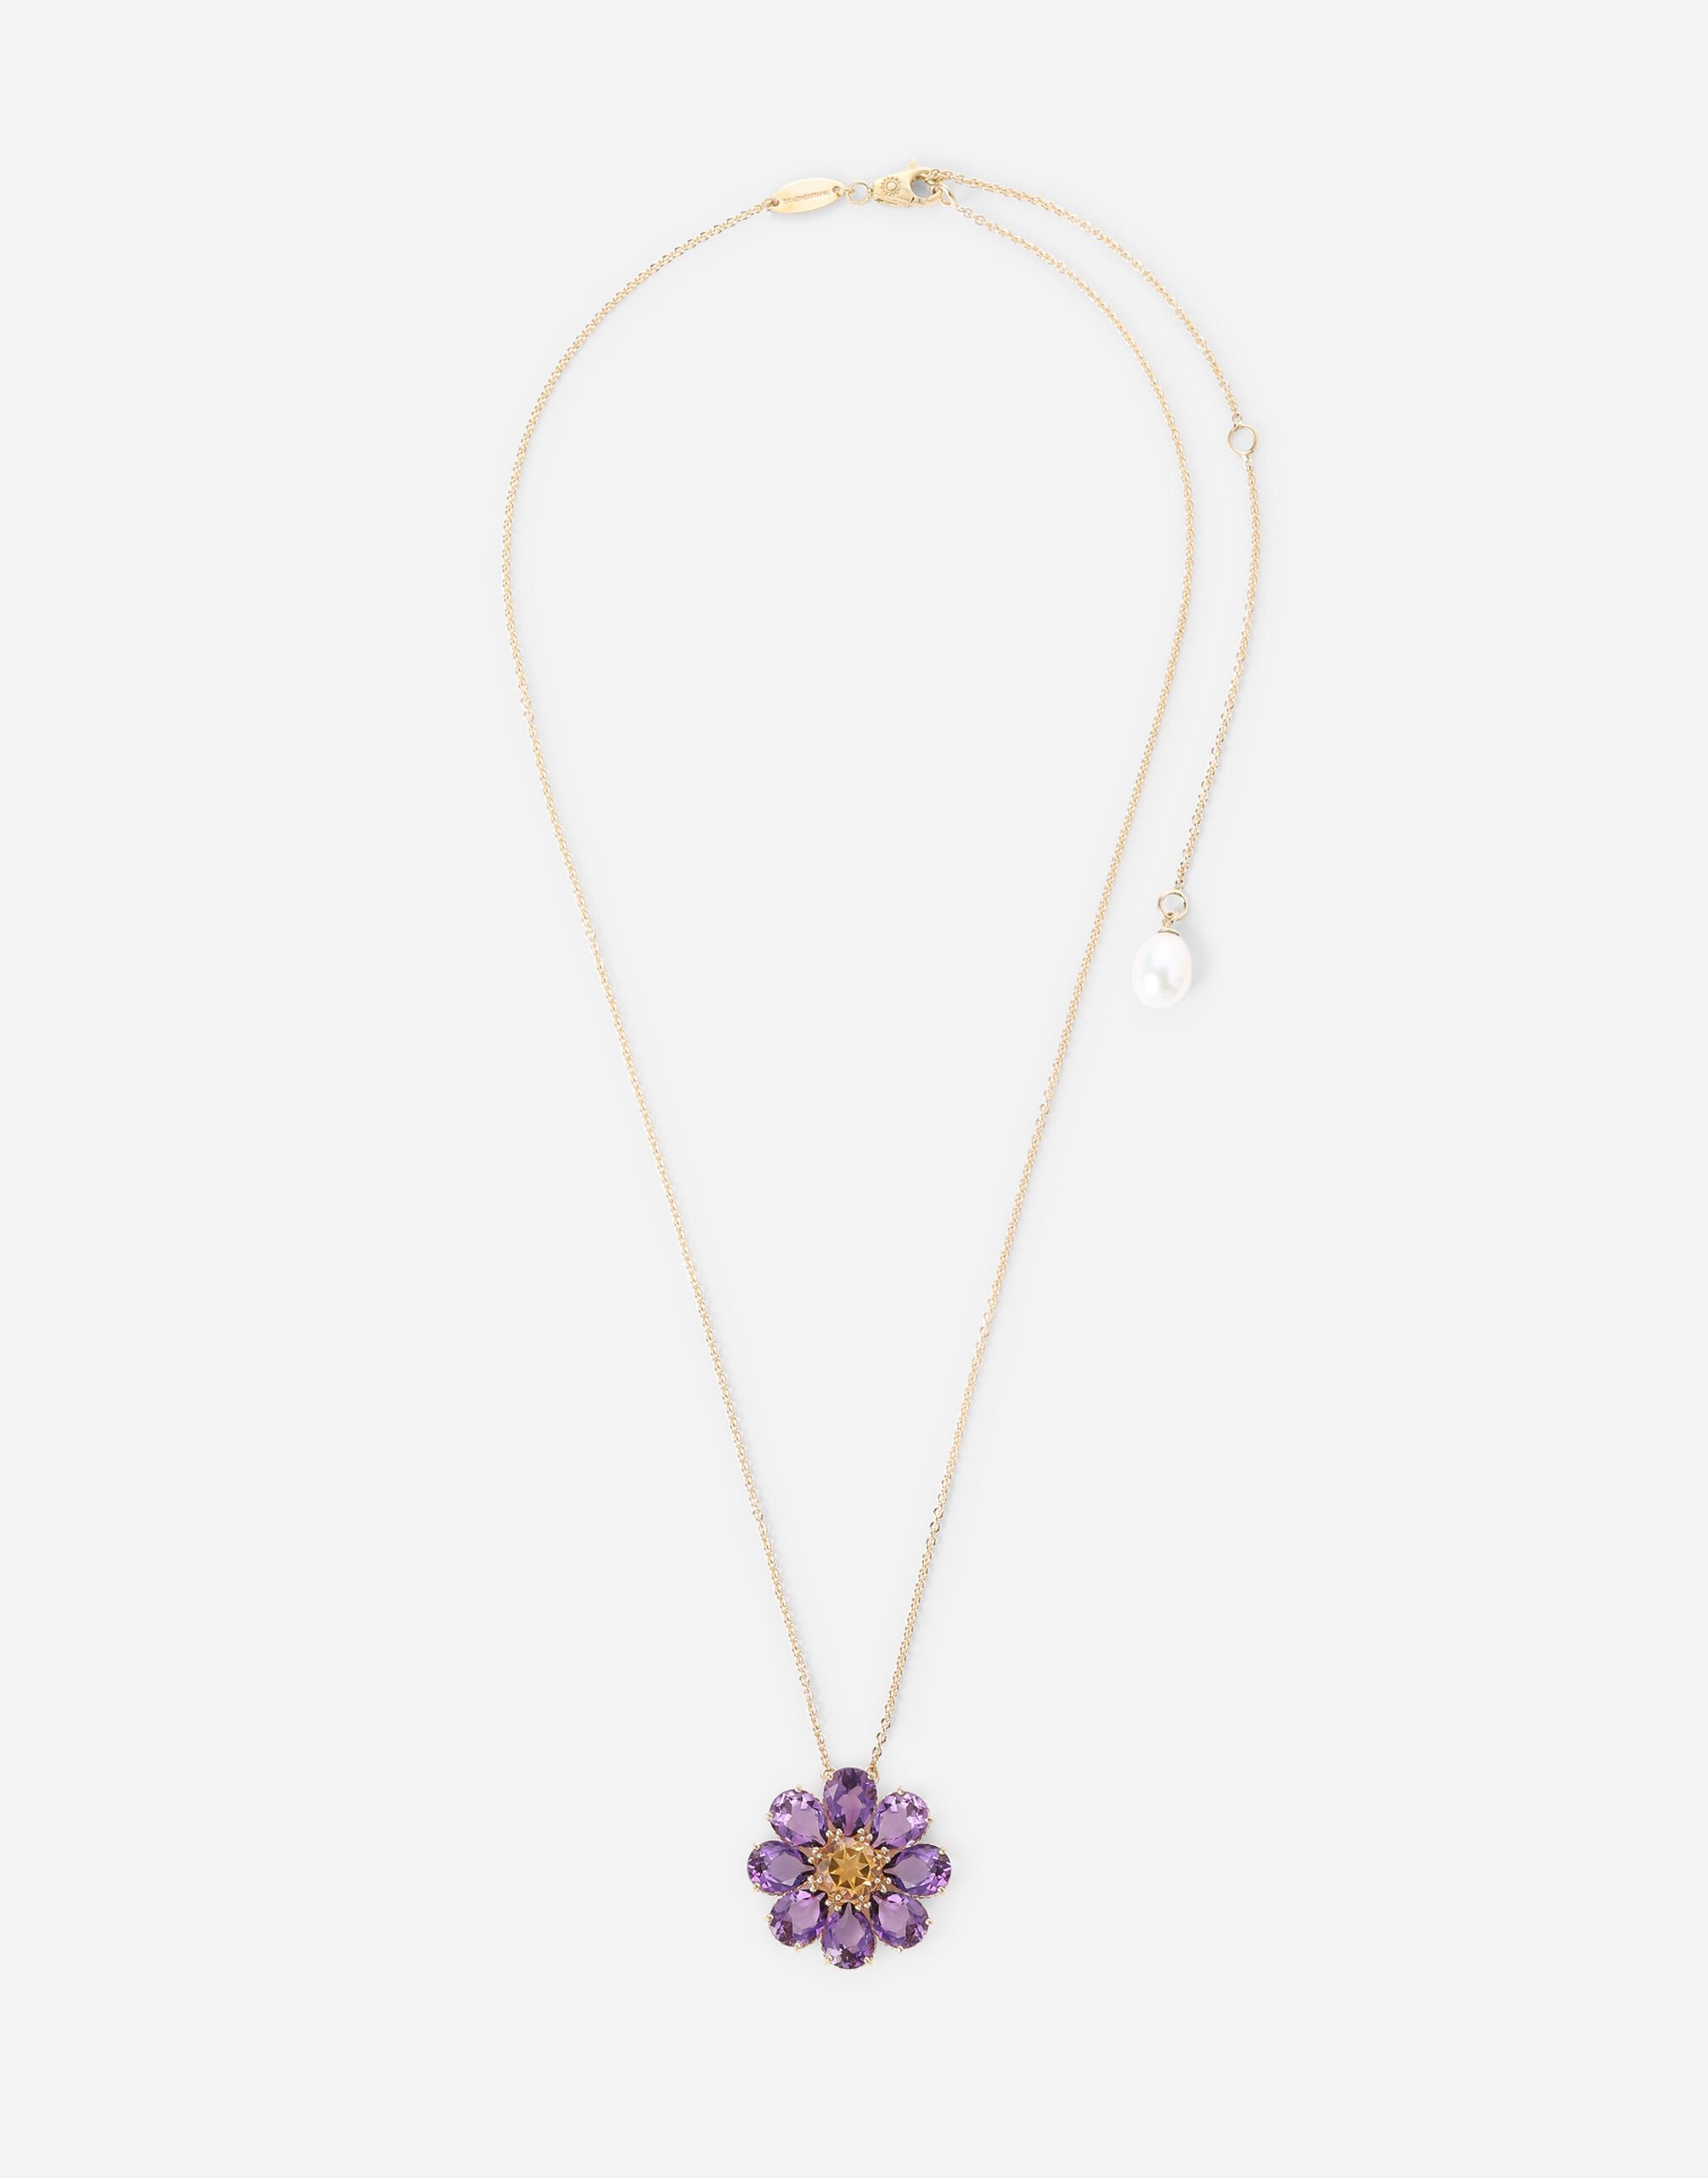 Dolce & Gabbana Spring necklace in yellow 18kt gold with amethyst floral motif Gold WEJP1GWROD1